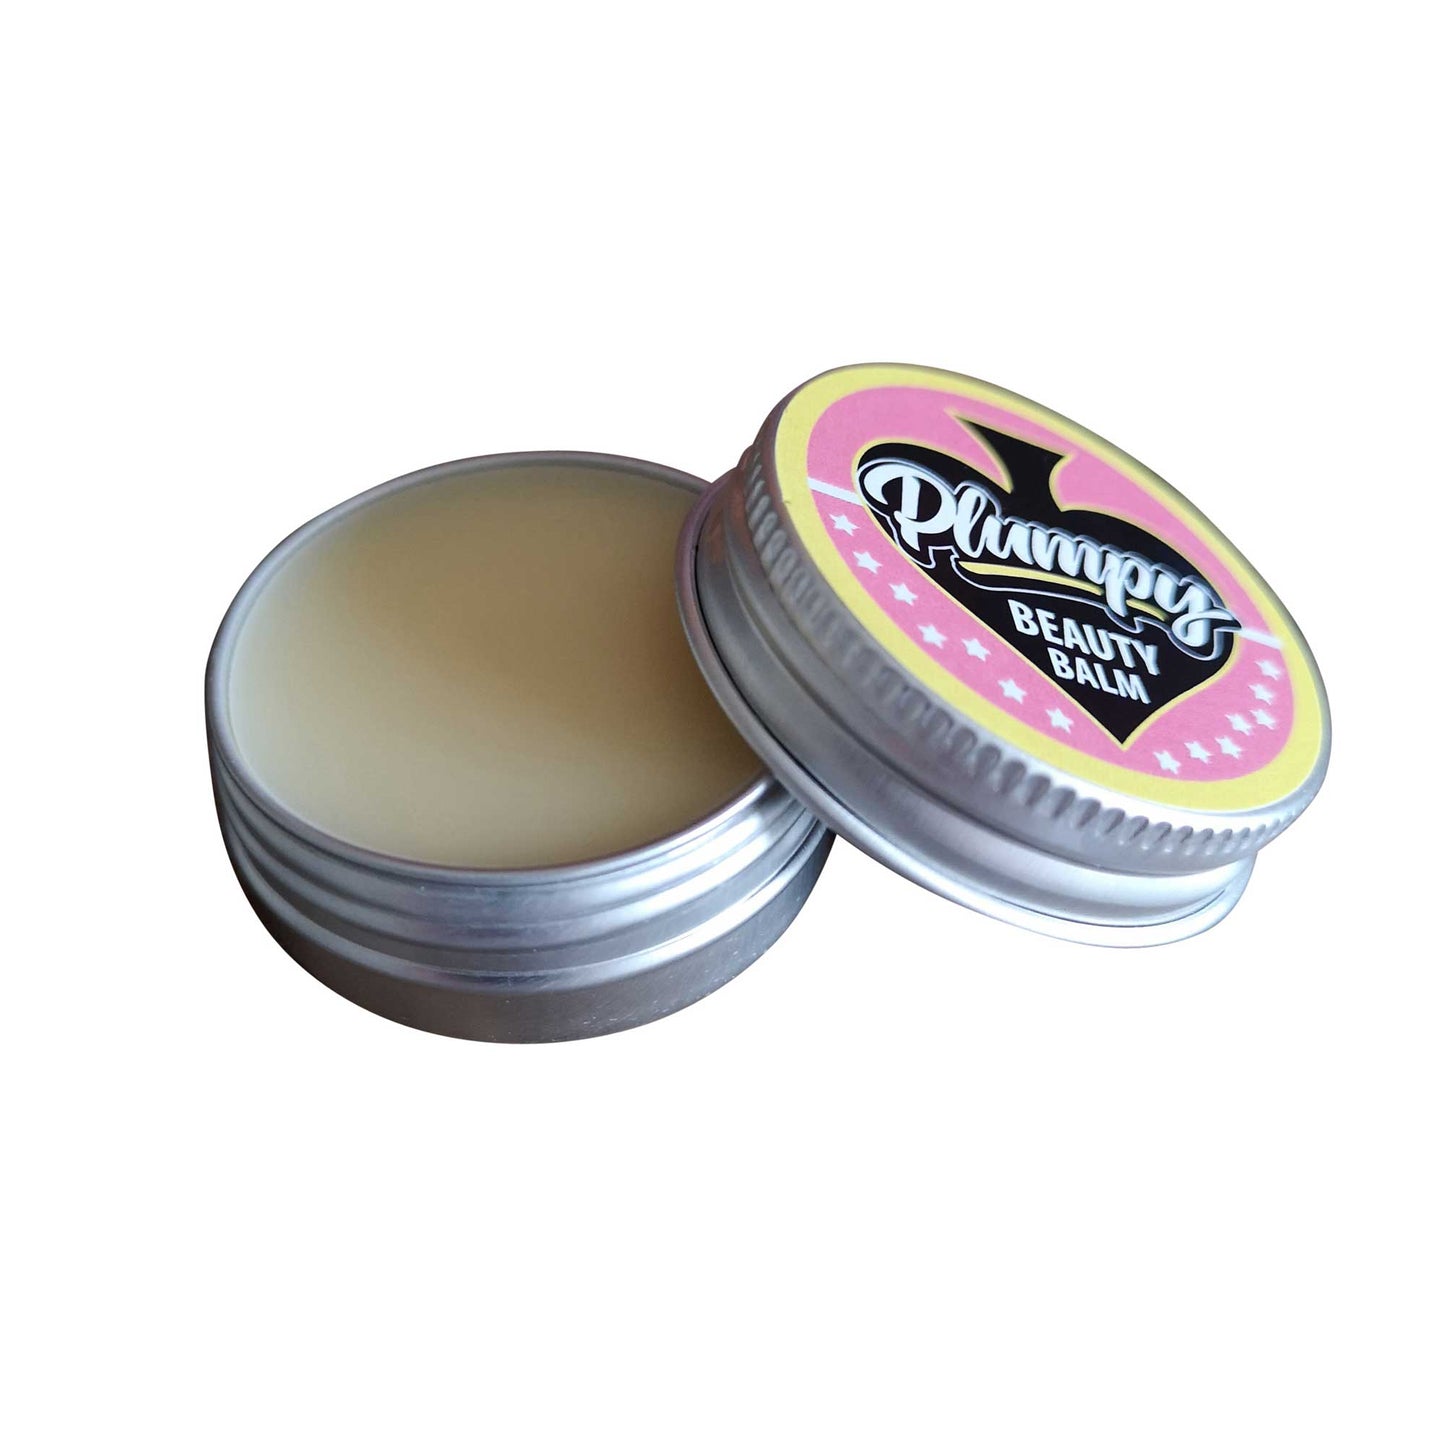 Plumpy Balms Beauty Balm Healing and Anti Ageing ingredients 